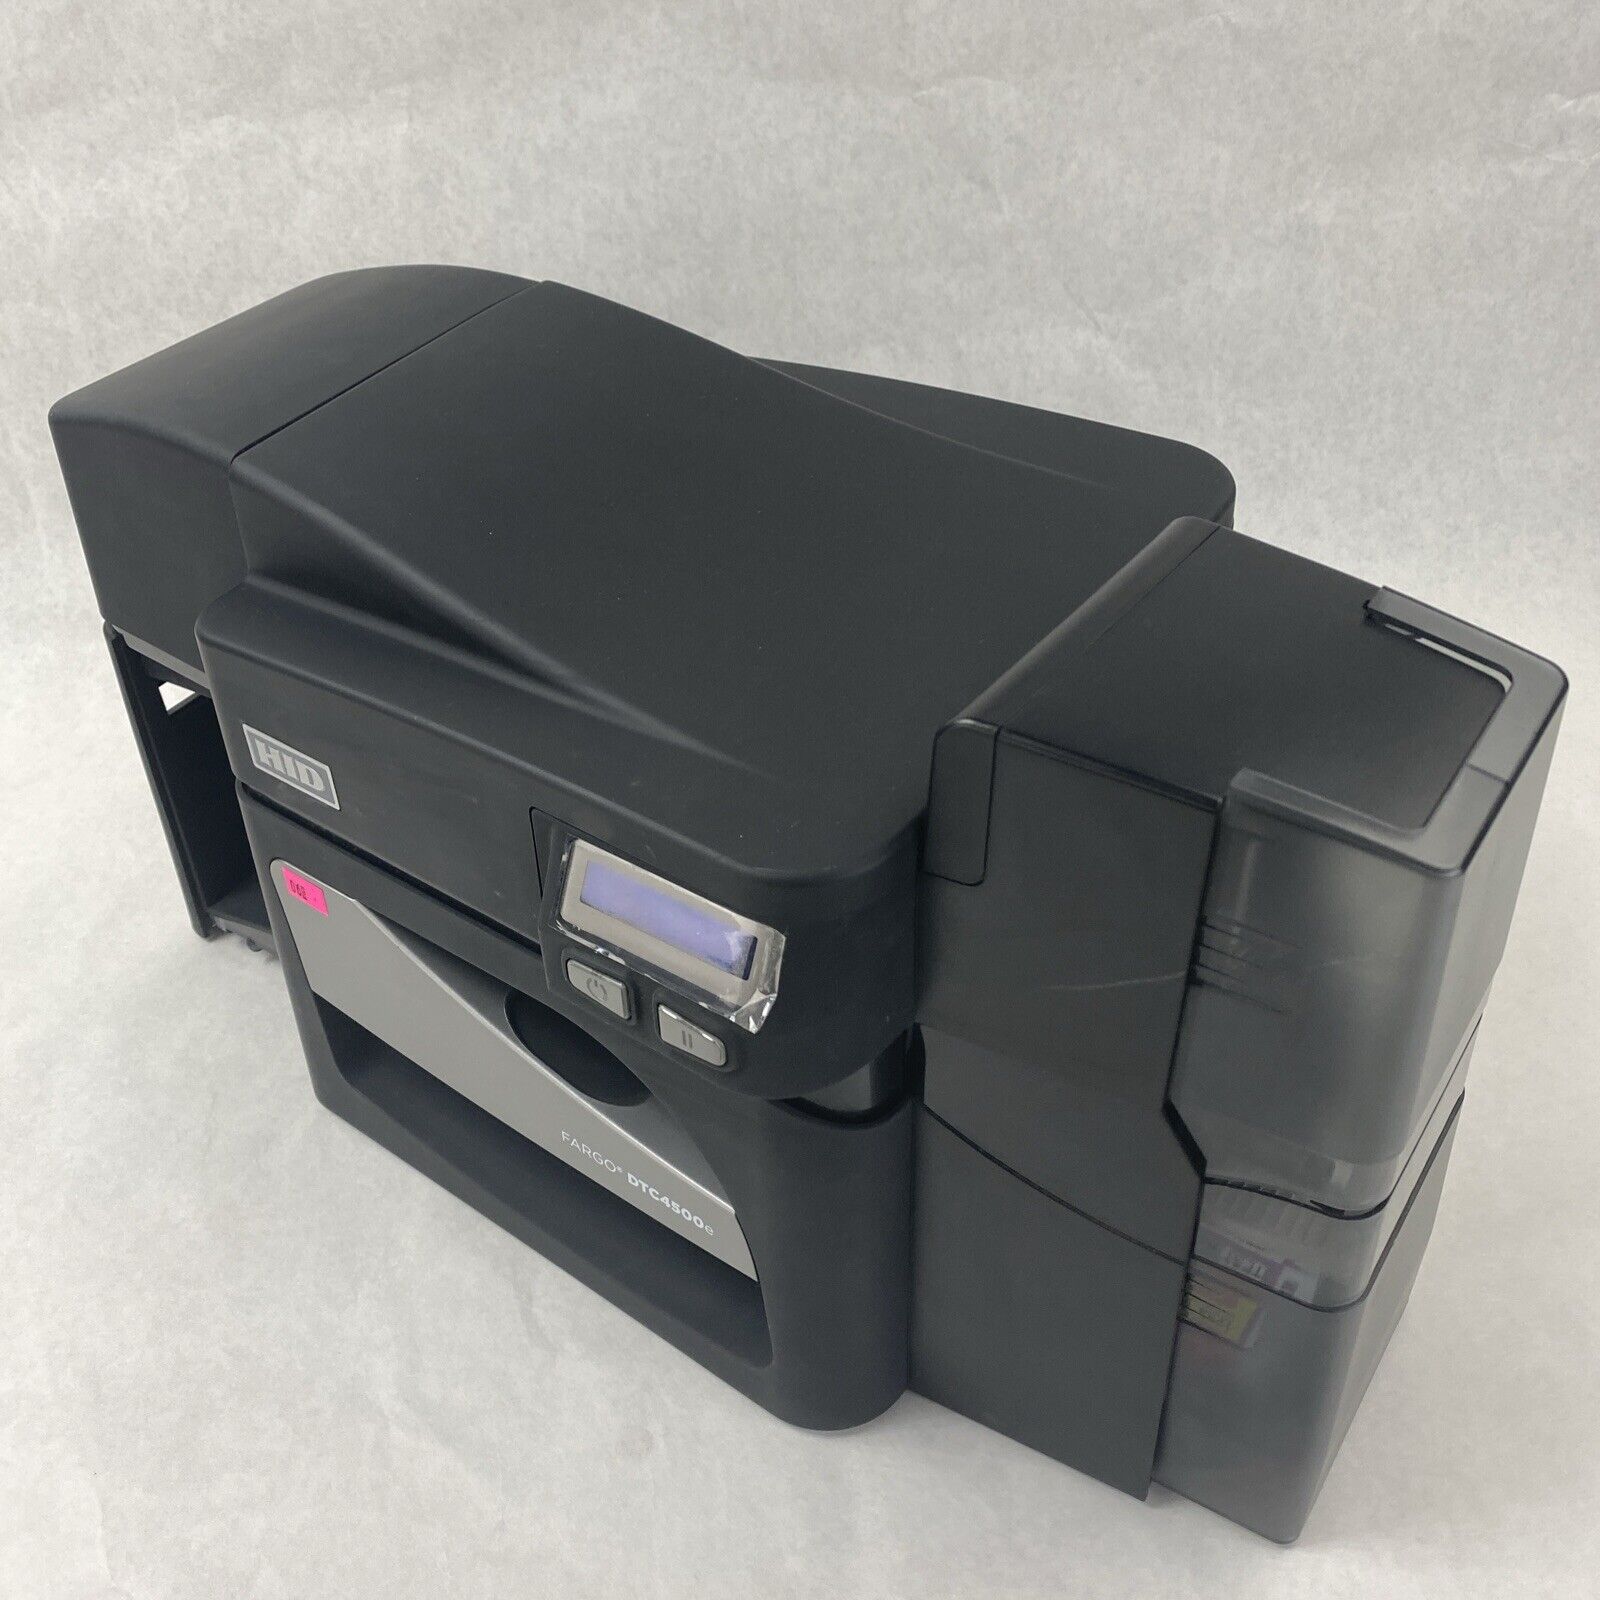 Fargo DTC4500e Color ID Card Printer TESTED but NO POWER SUPPLY